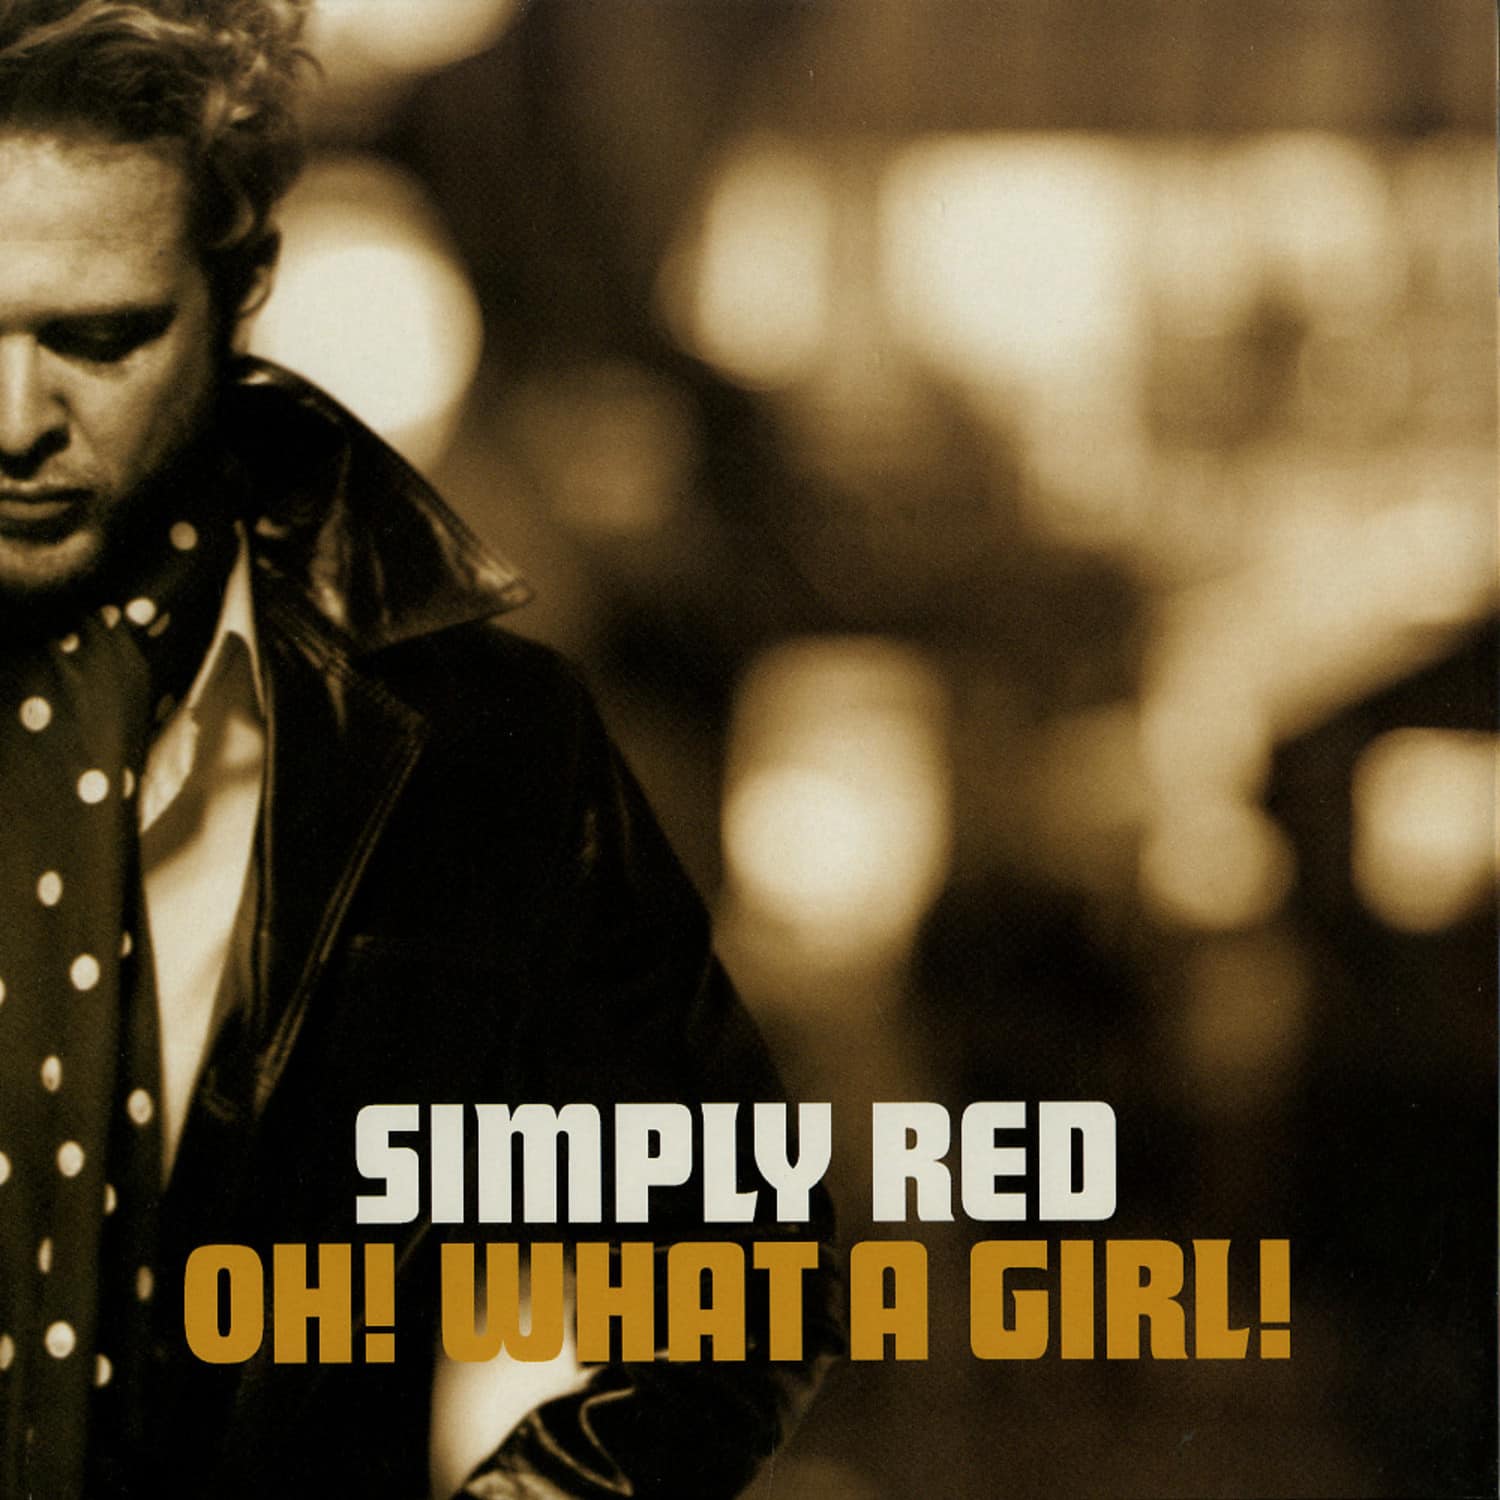 Simply Red - OH! WHAT A GIRL!